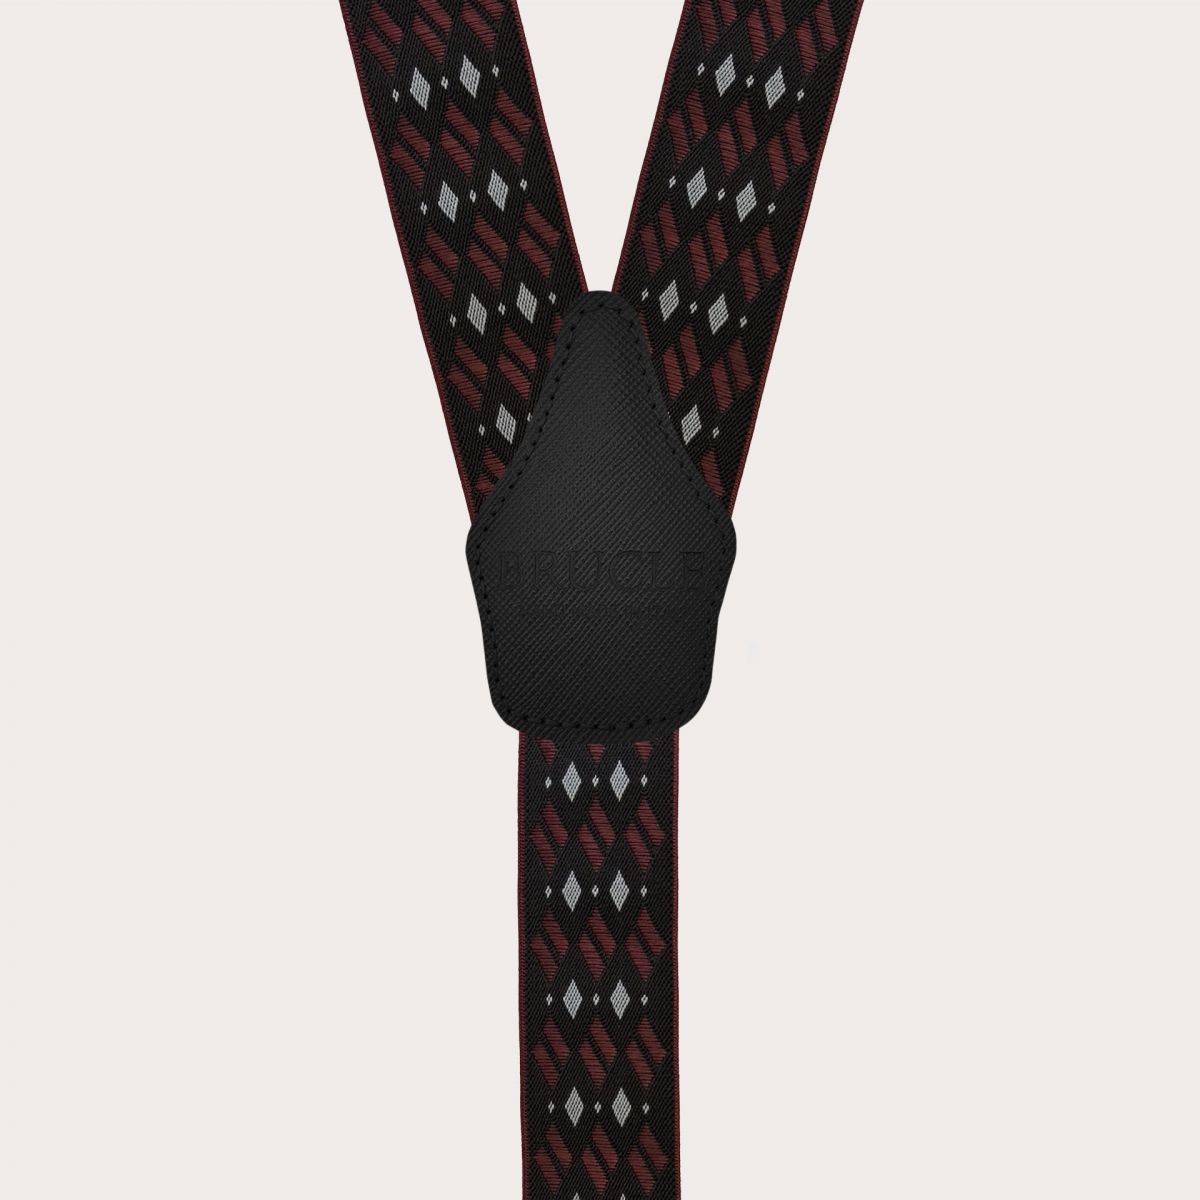 Black and burgundy patterned men's suspenders with diamonds for buttons or nickel-free clips